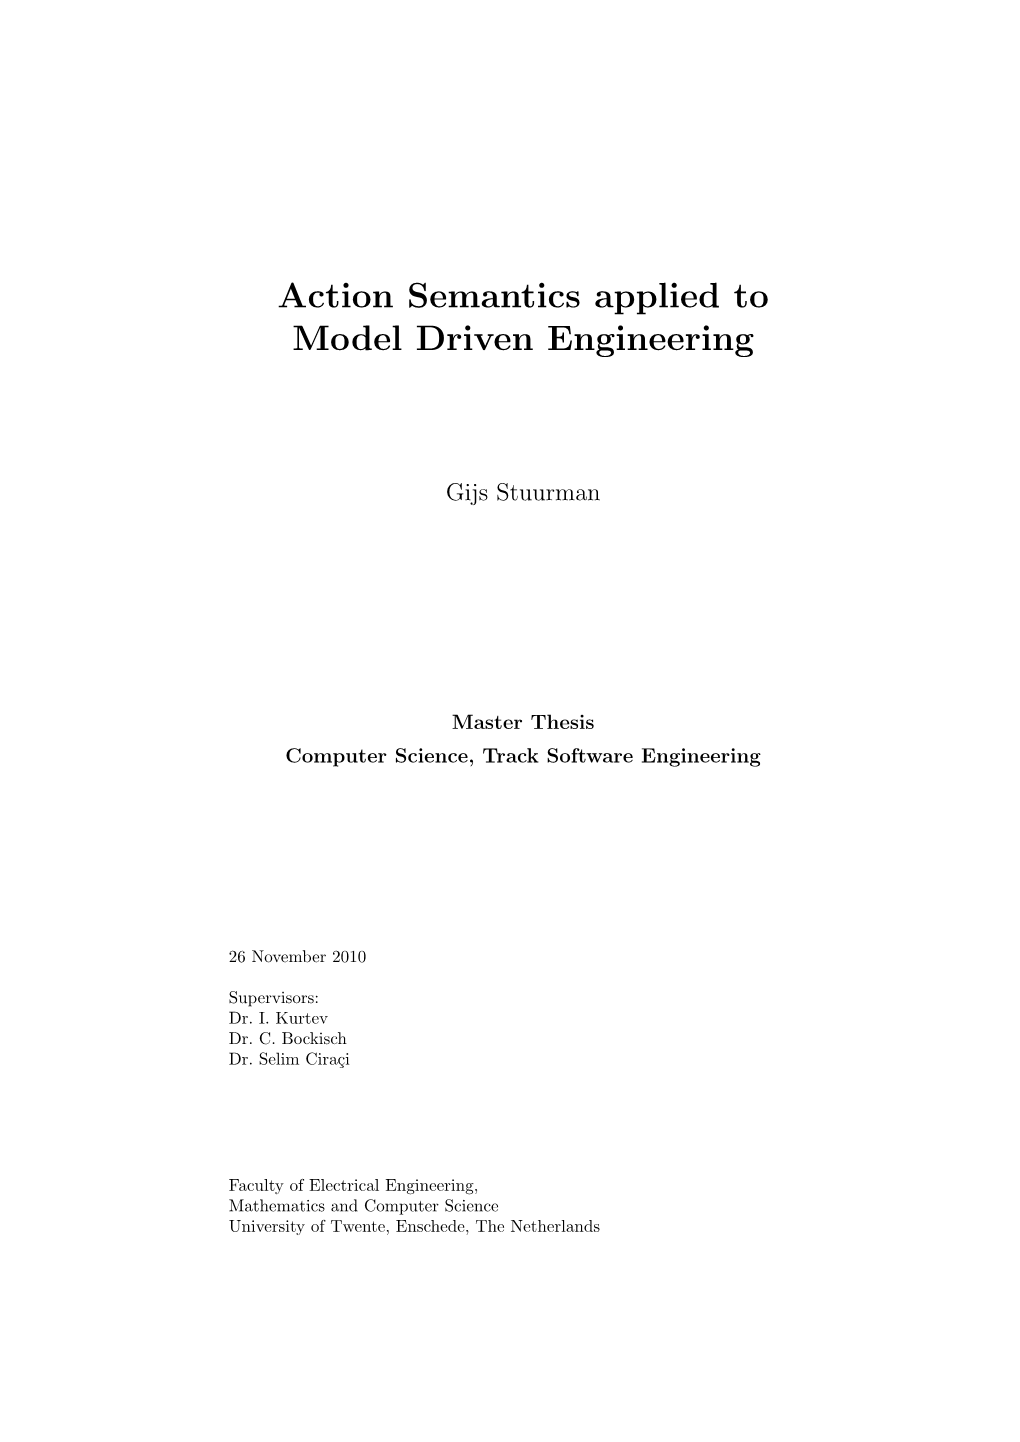 Action Semantics Applied to Model Driven Engineering